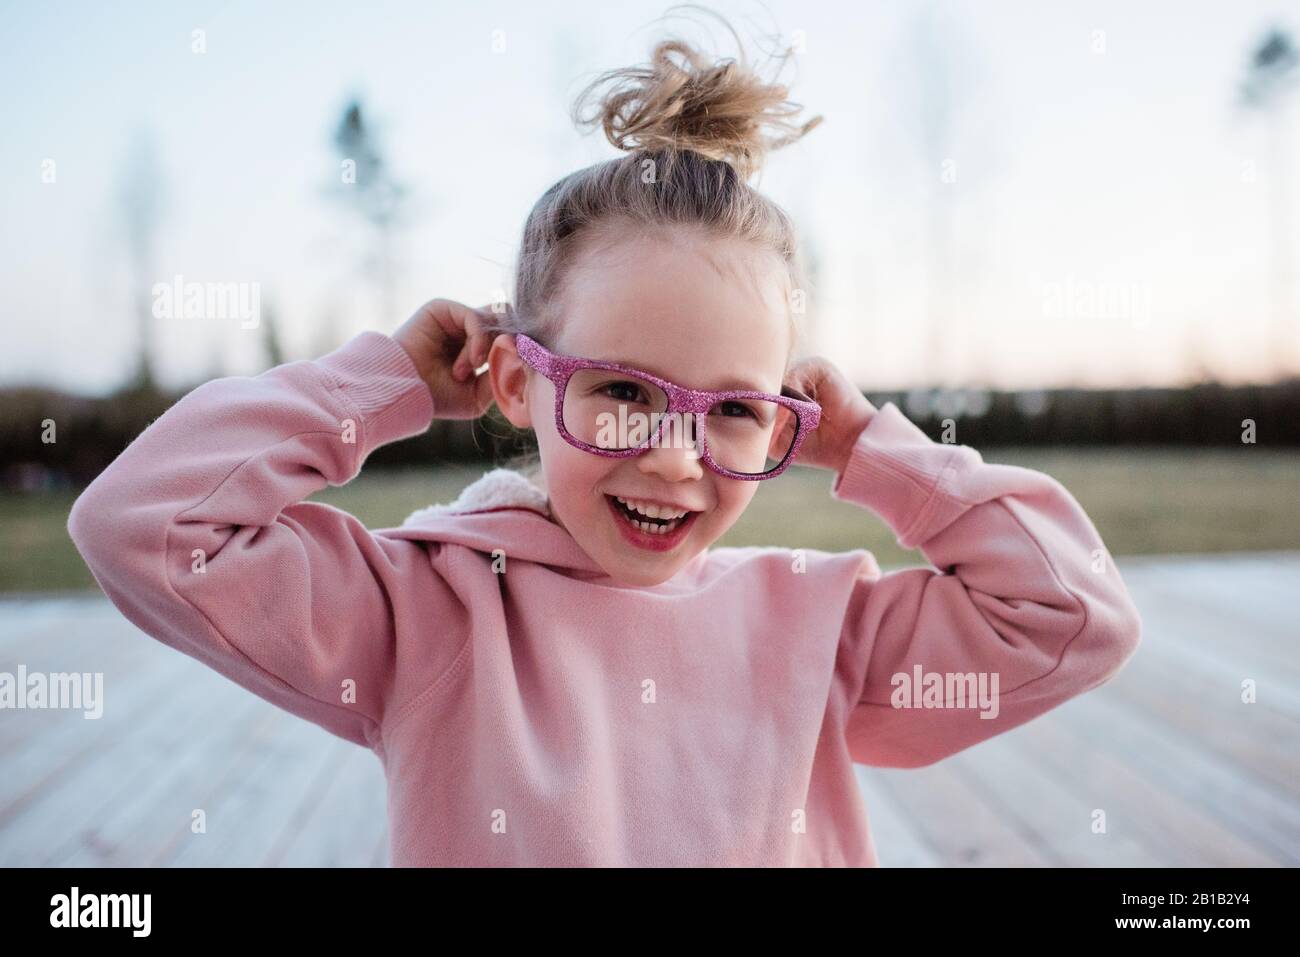 portrait of a young girl pulling silly faces with pink sparkly glasses Stock Photo